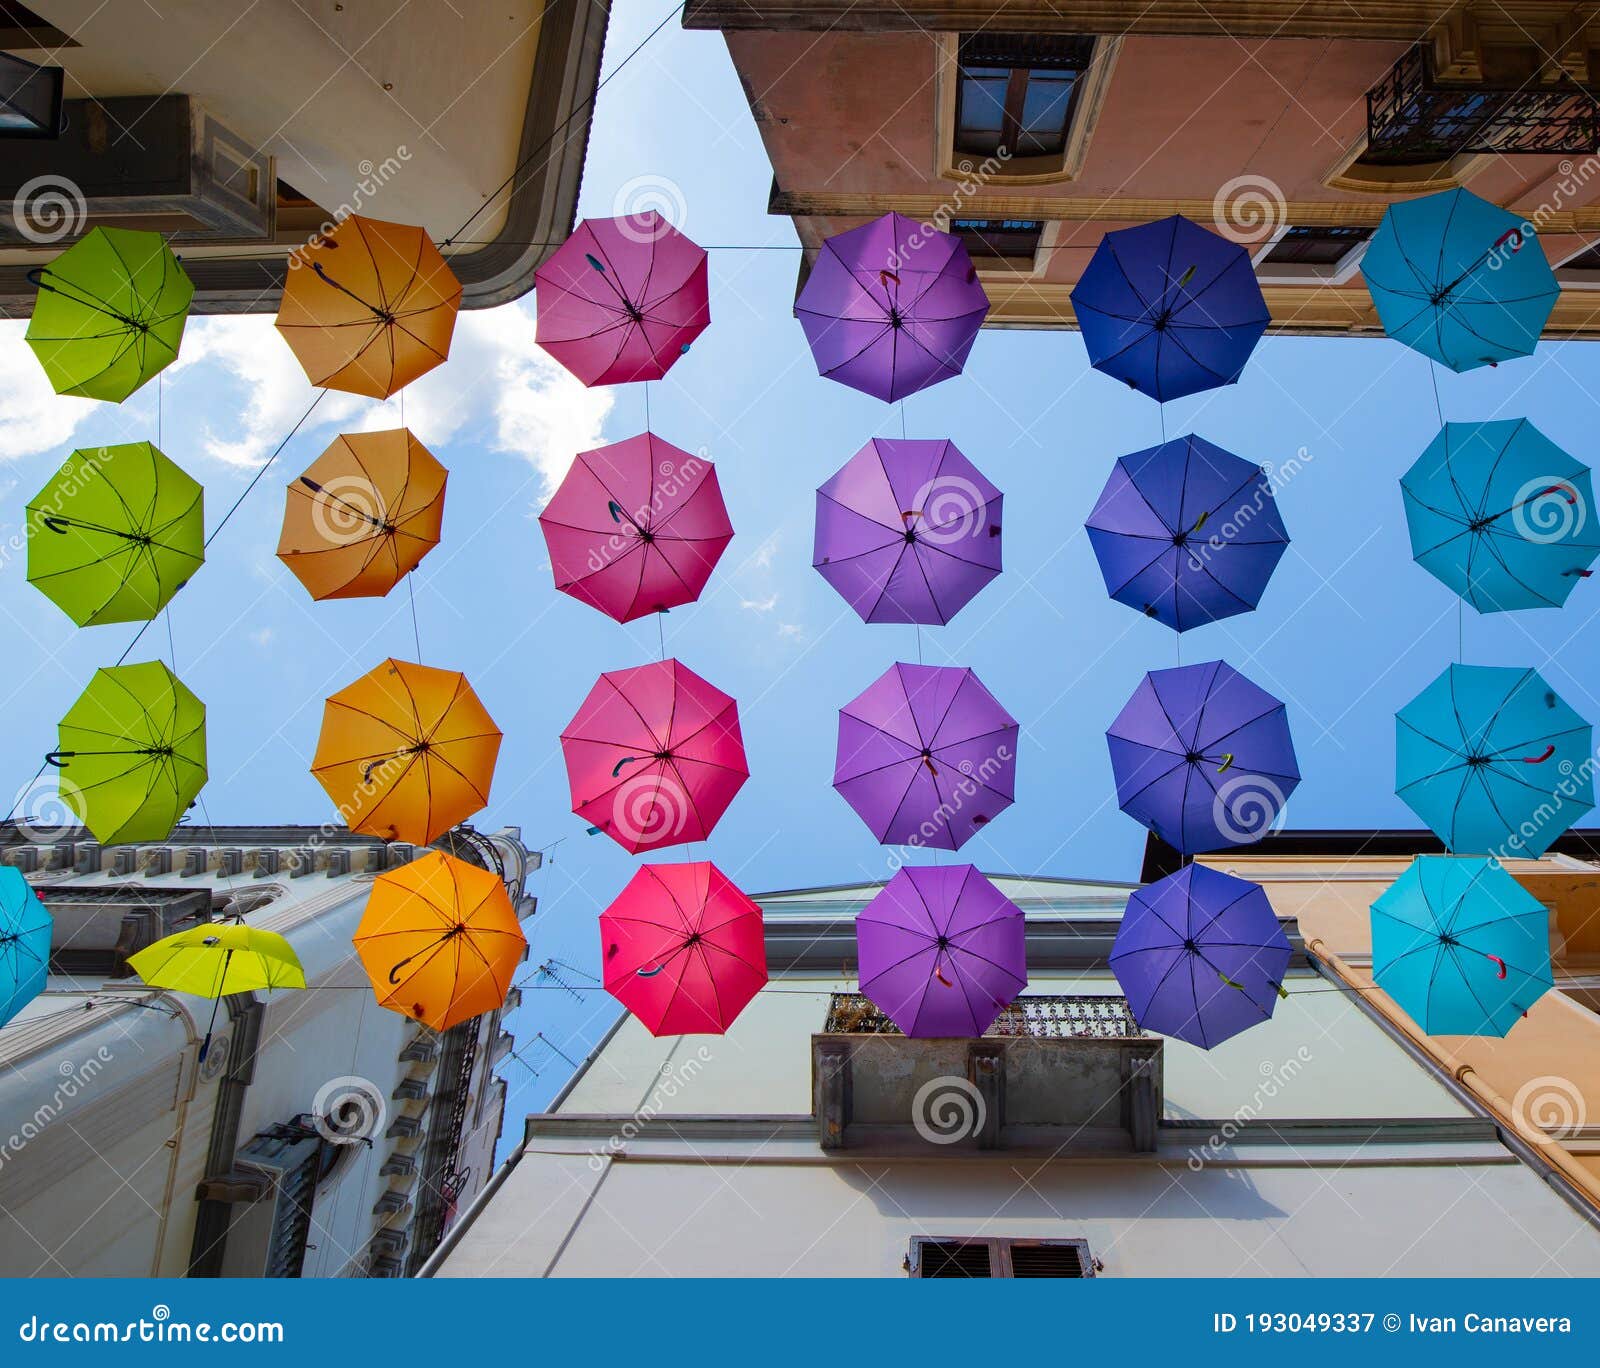 iglesias, italy: colorful umbrellas hanging over a street in old iglesias city in a sunny day